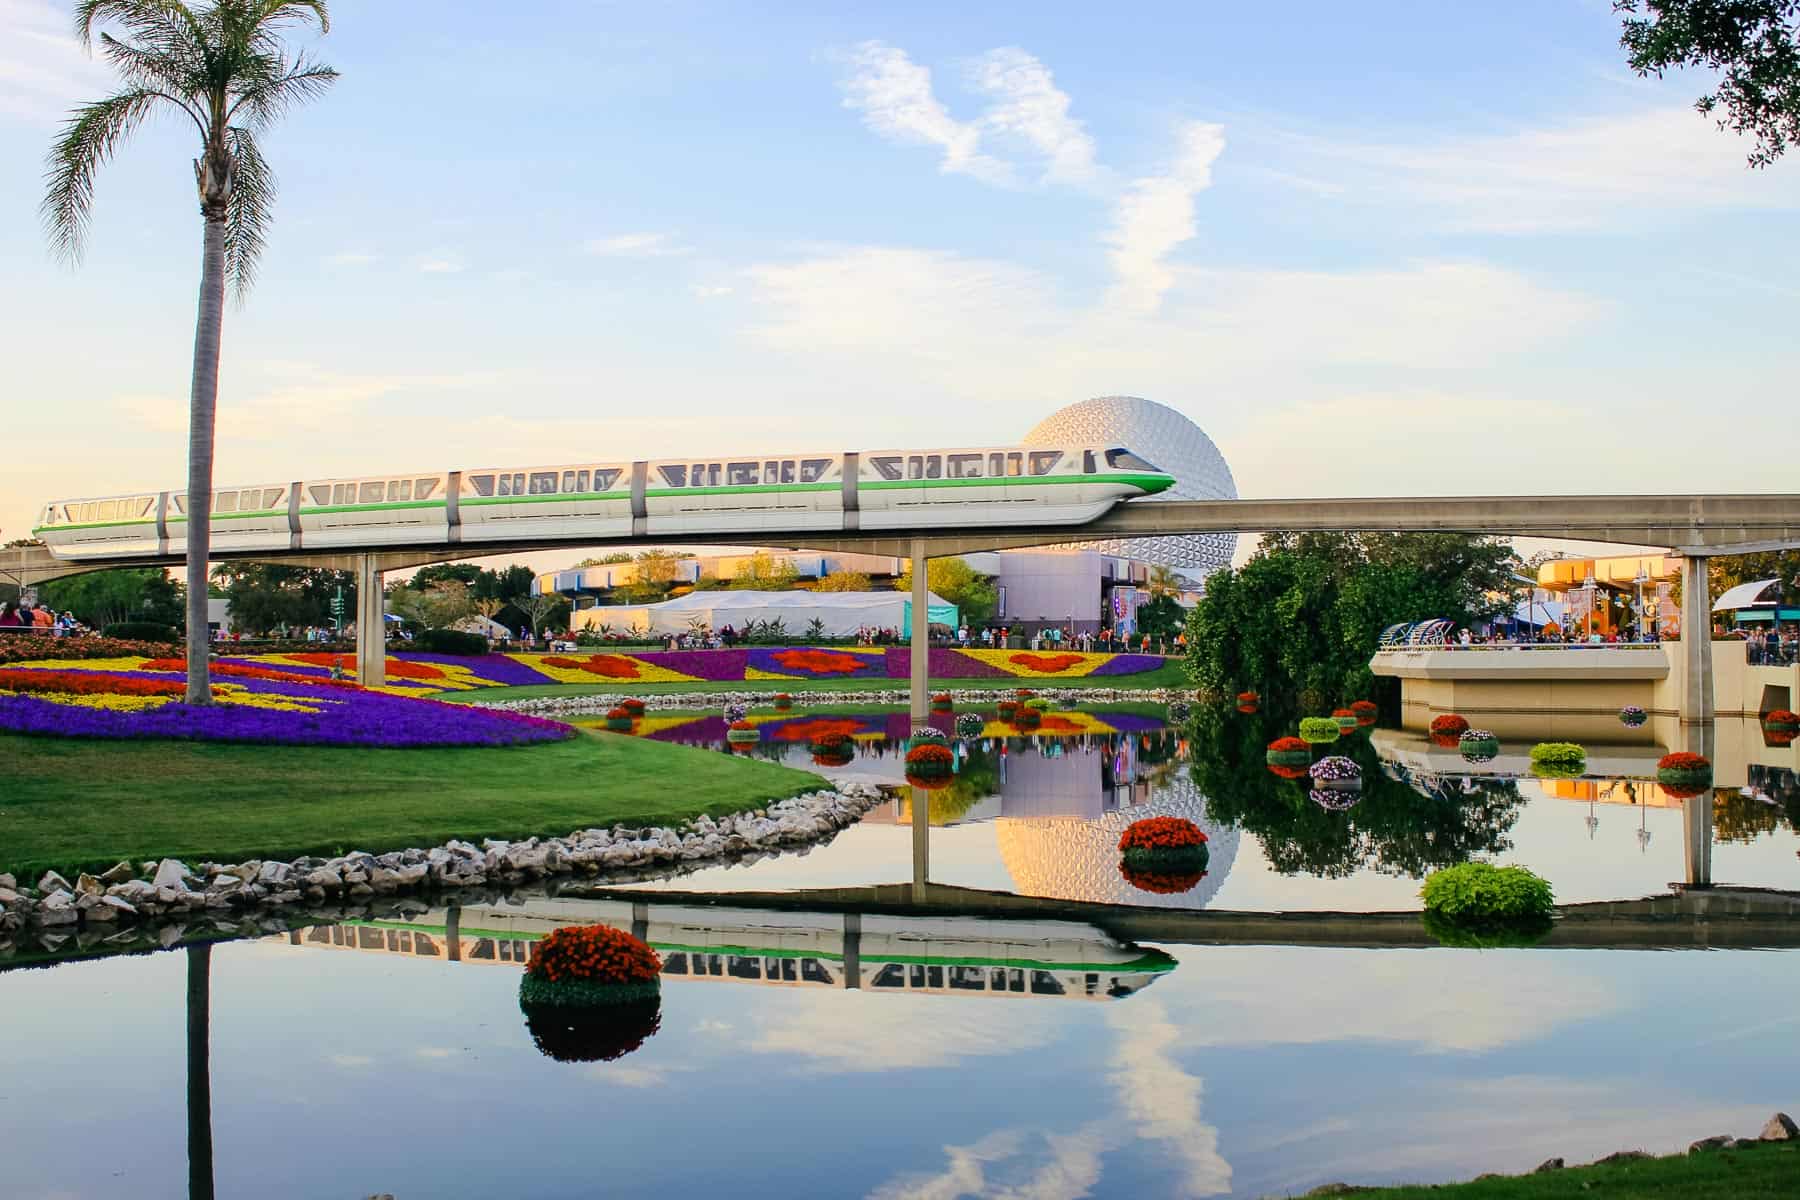 Shows the Epcot Monorail as it loops through the park. 